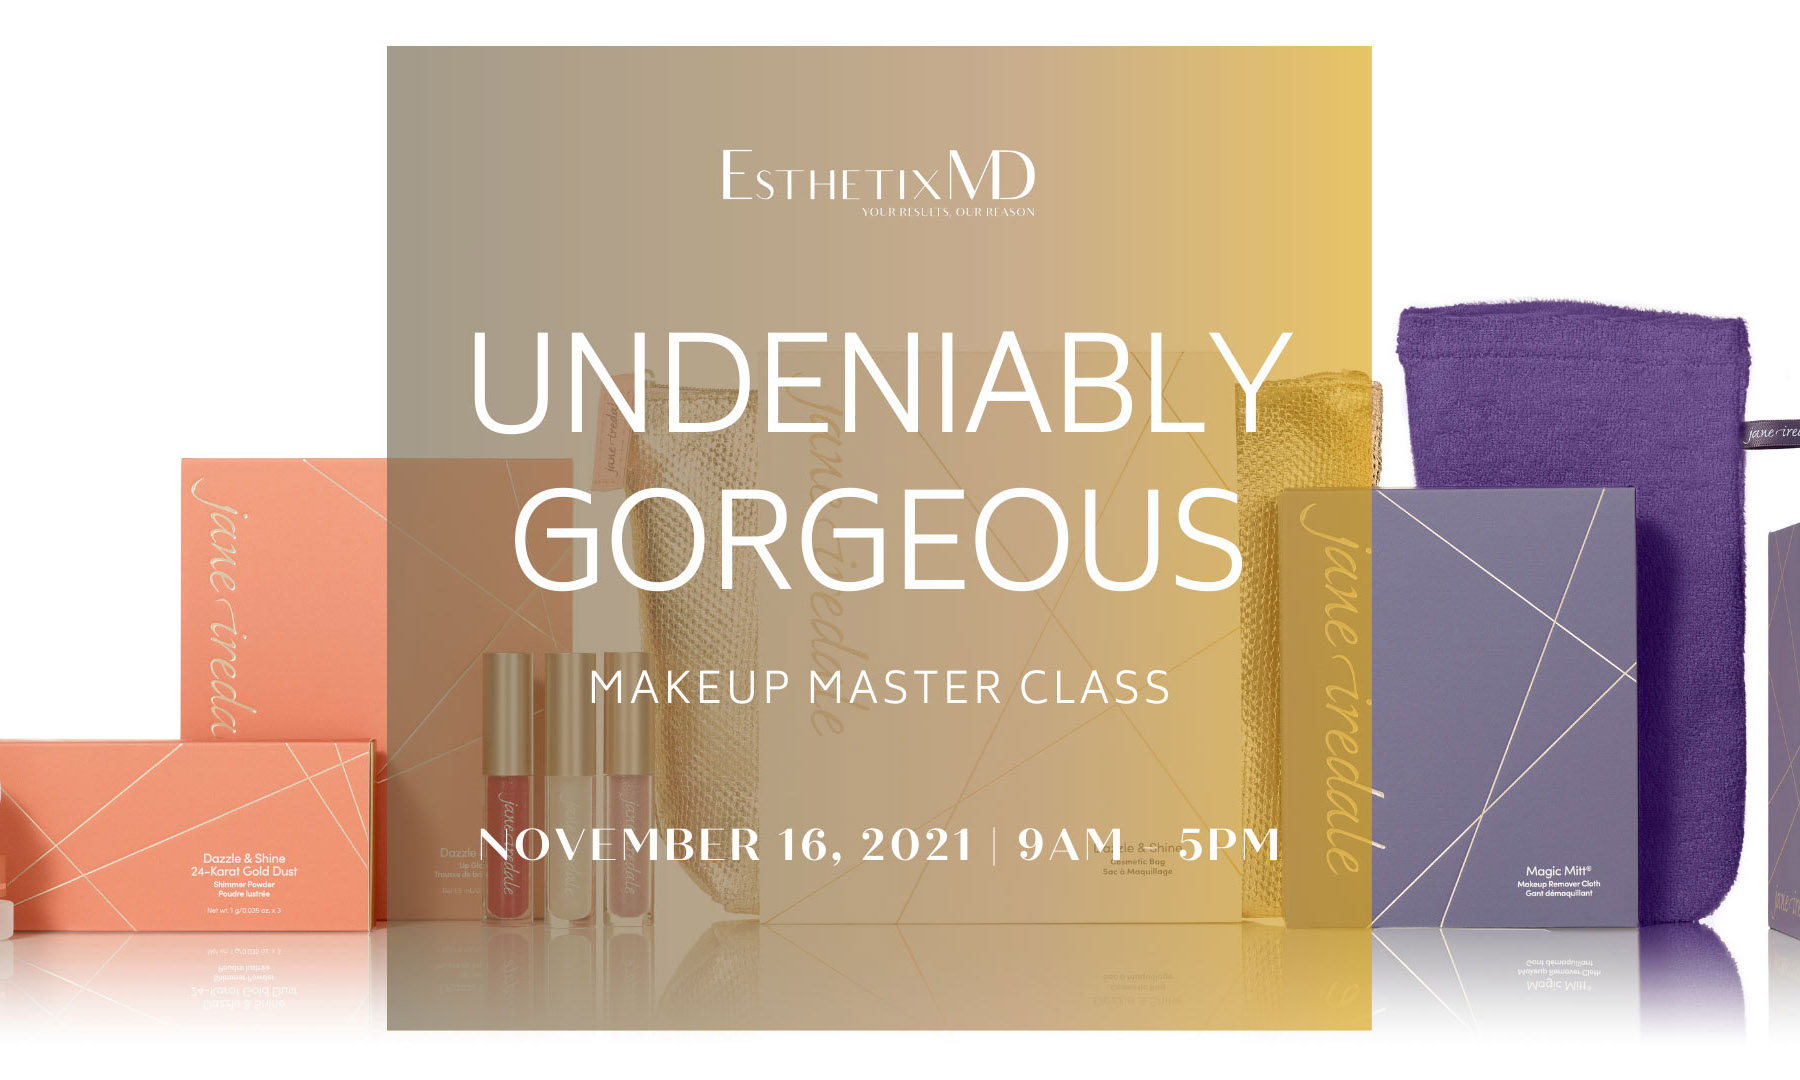 Undeniably Gorgeous Event 11.16